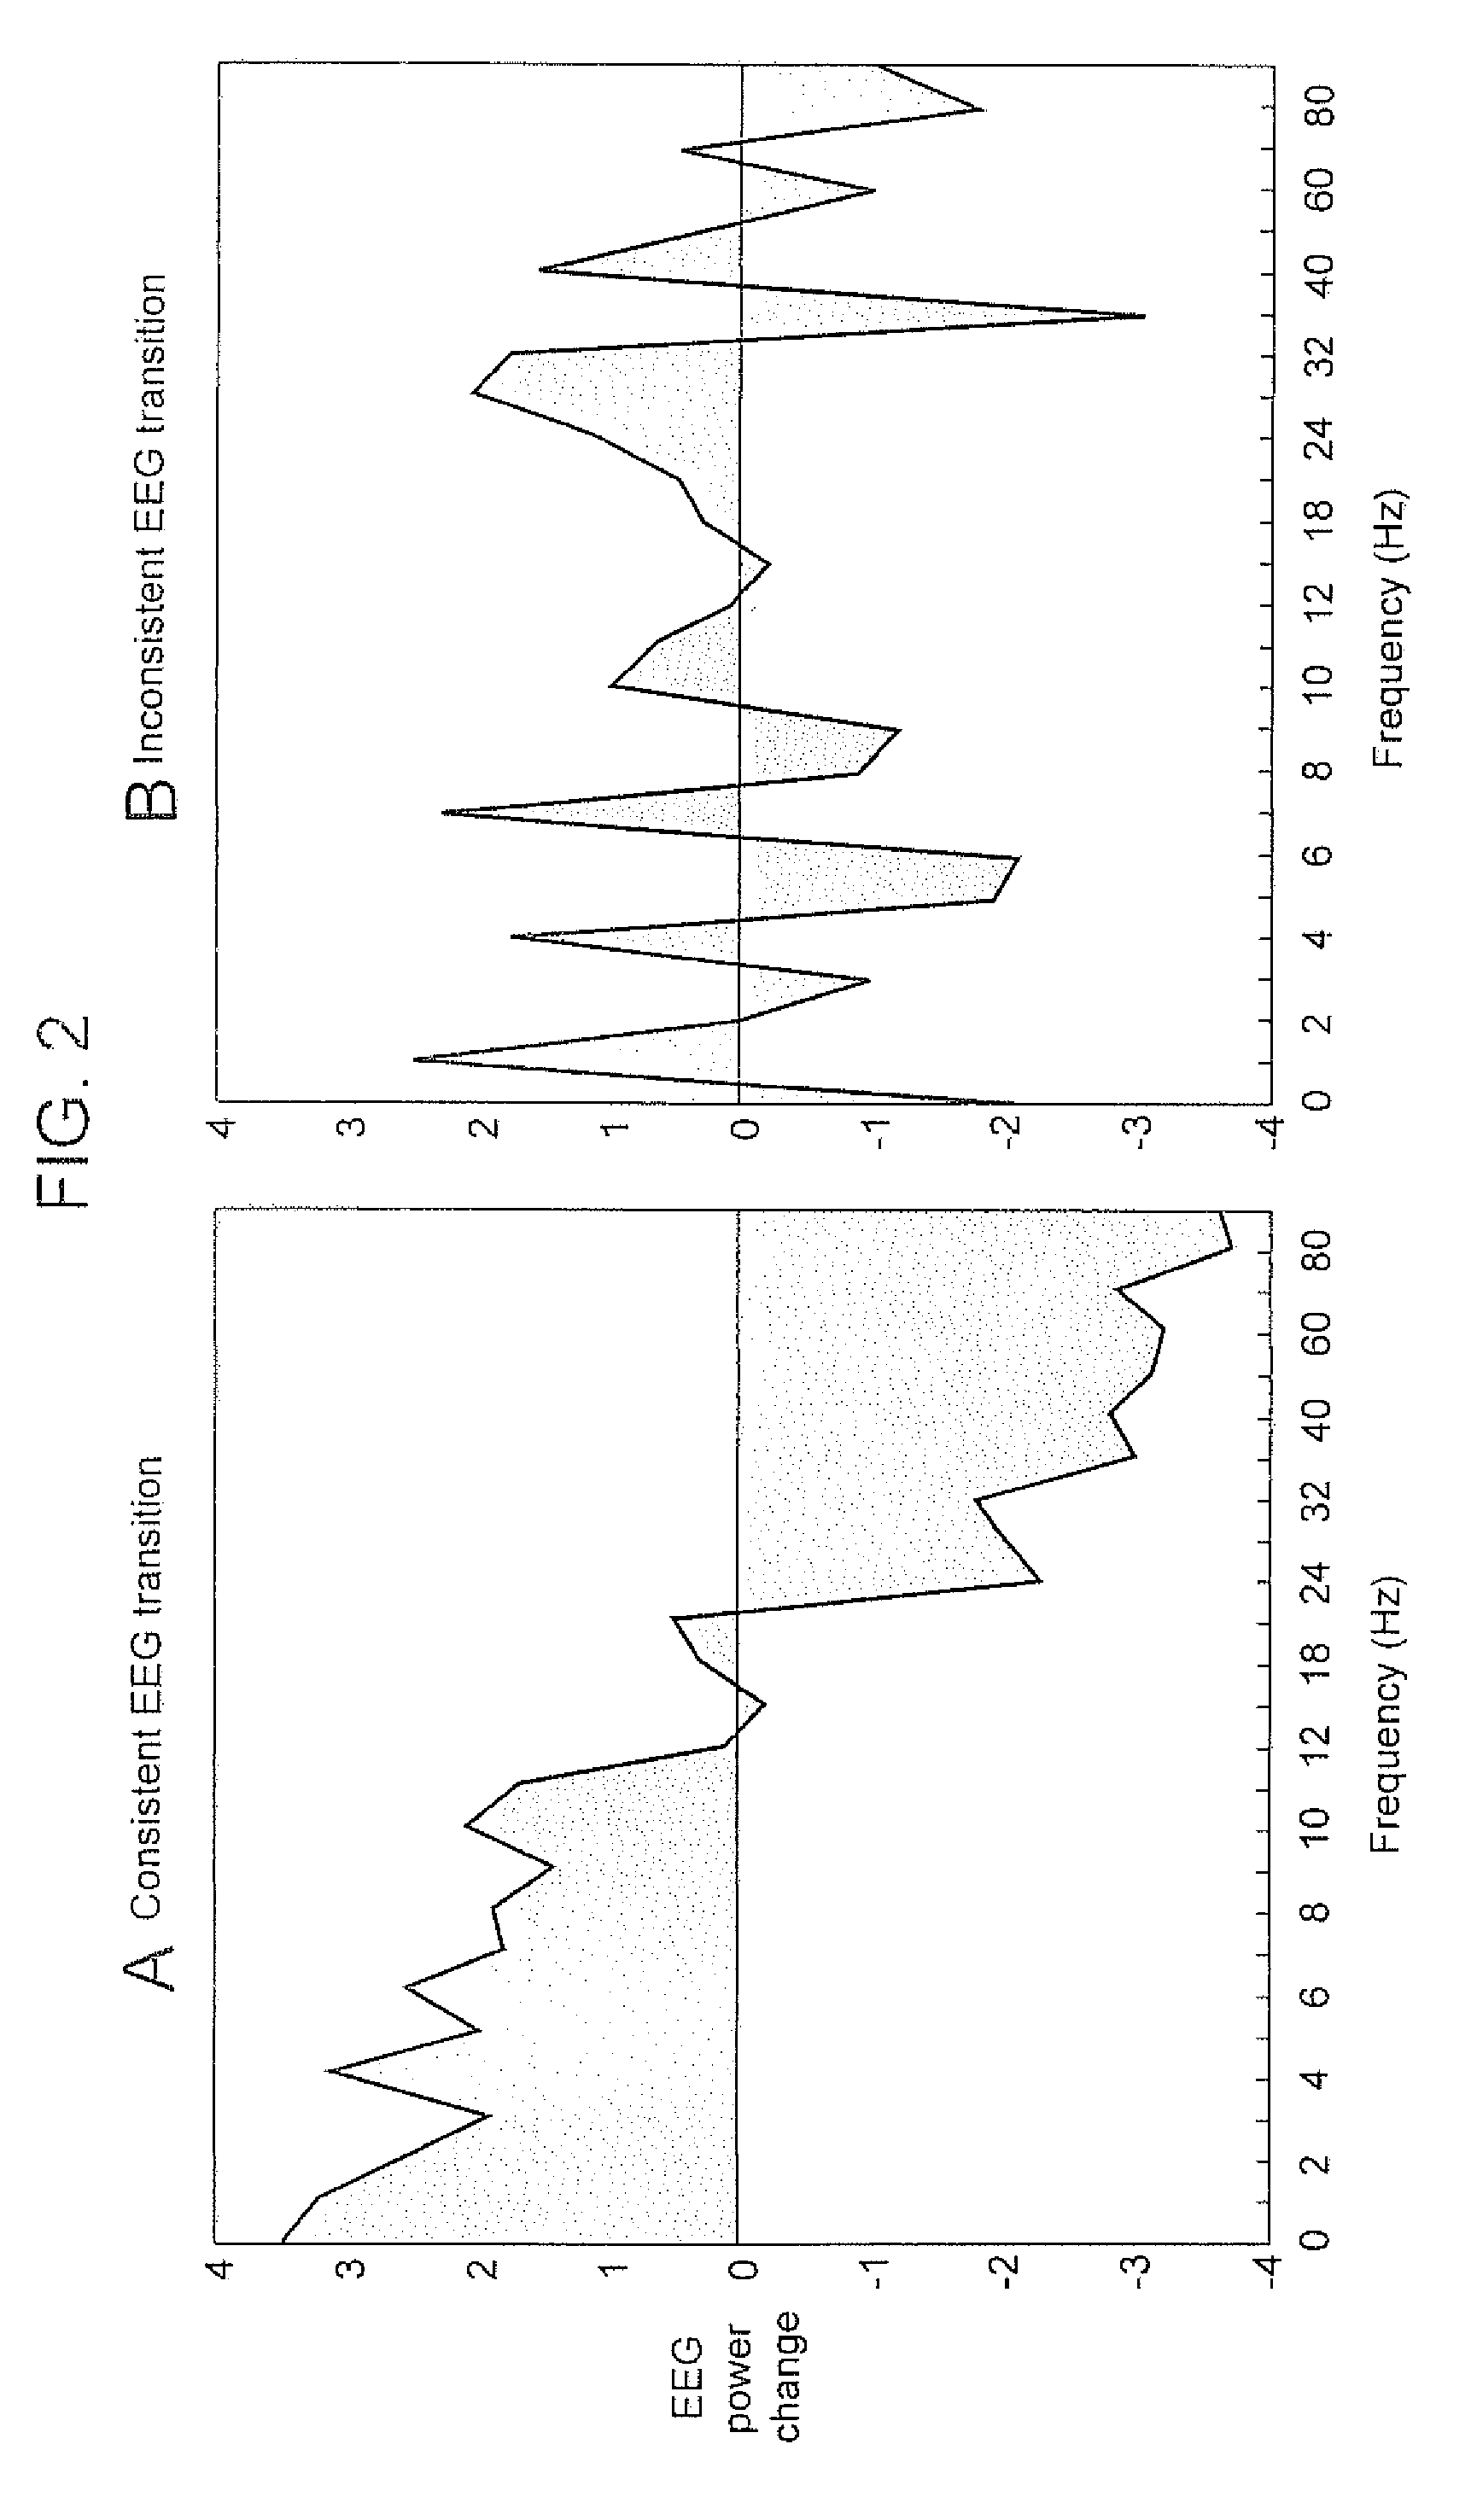 Method, Apparatus and Computer Program Product For Assessment of Attentional Impairments